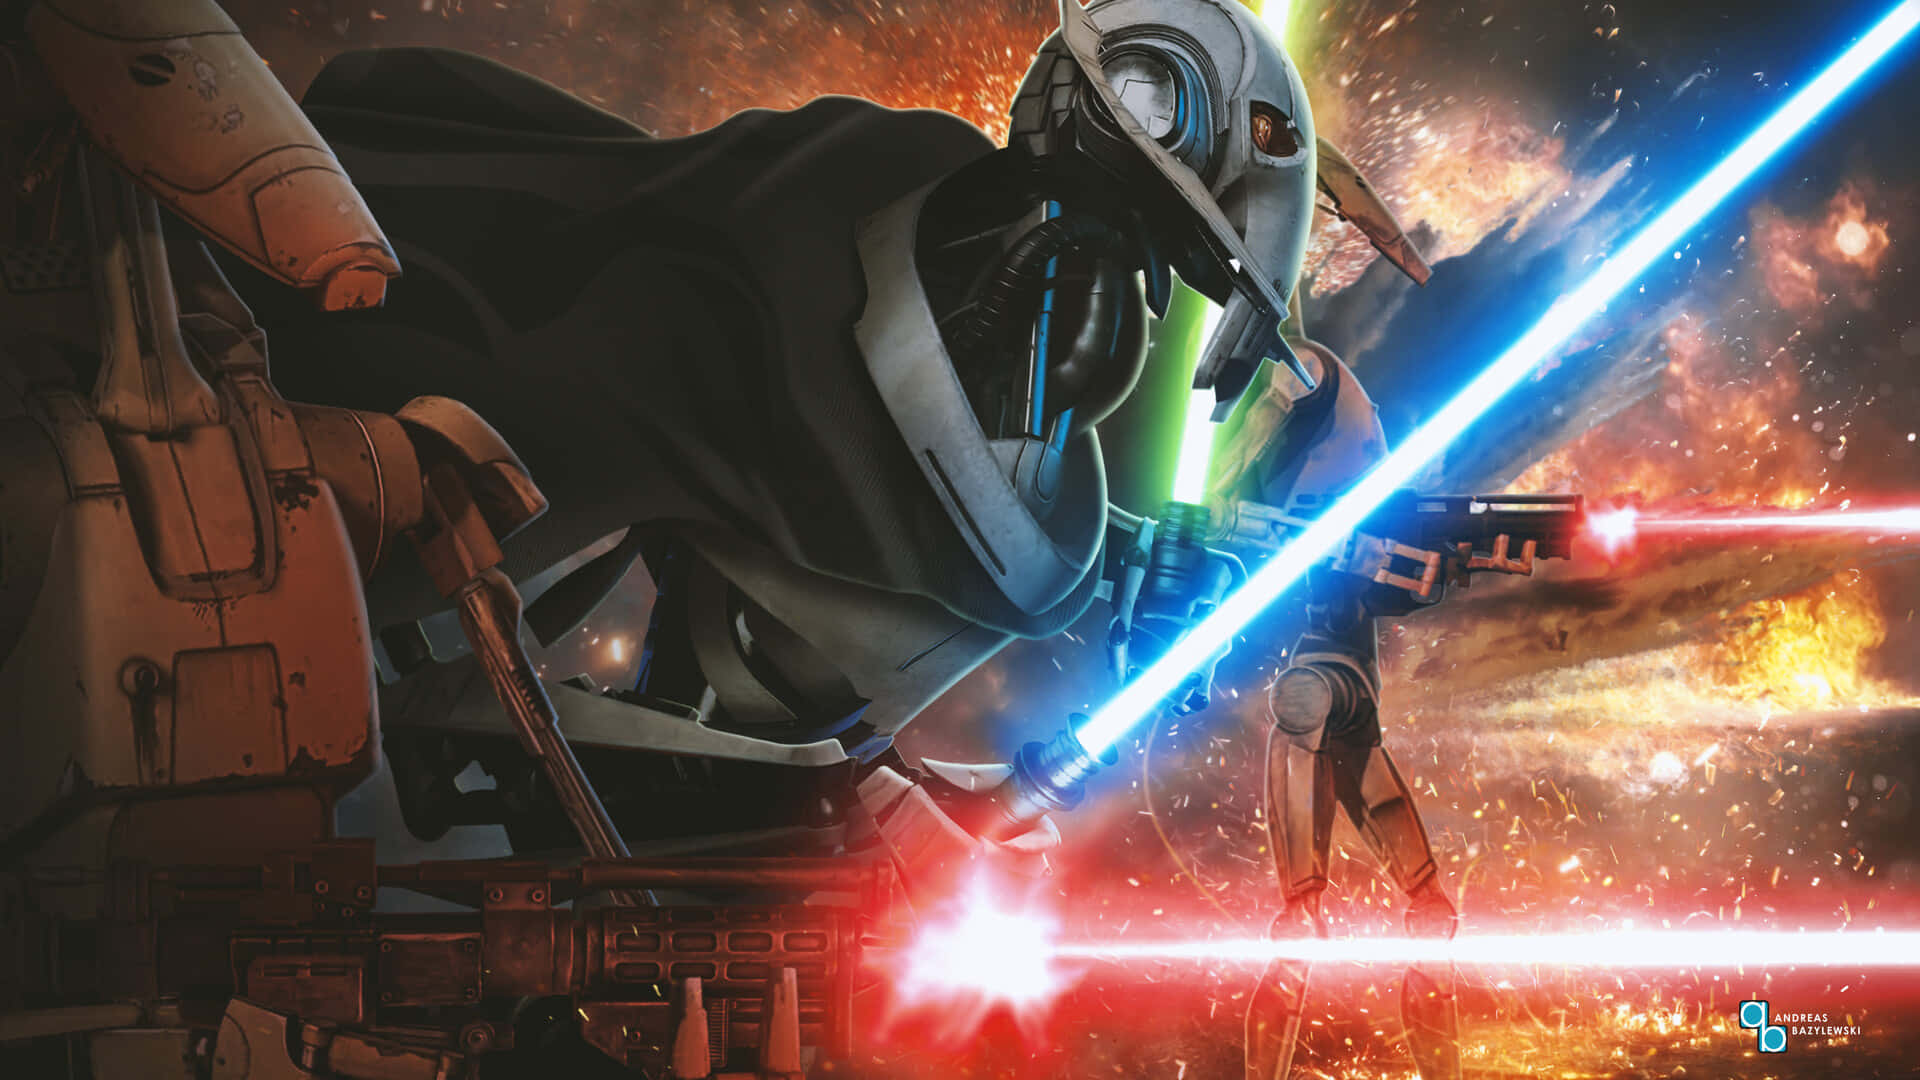 General Grievous Blue And Red